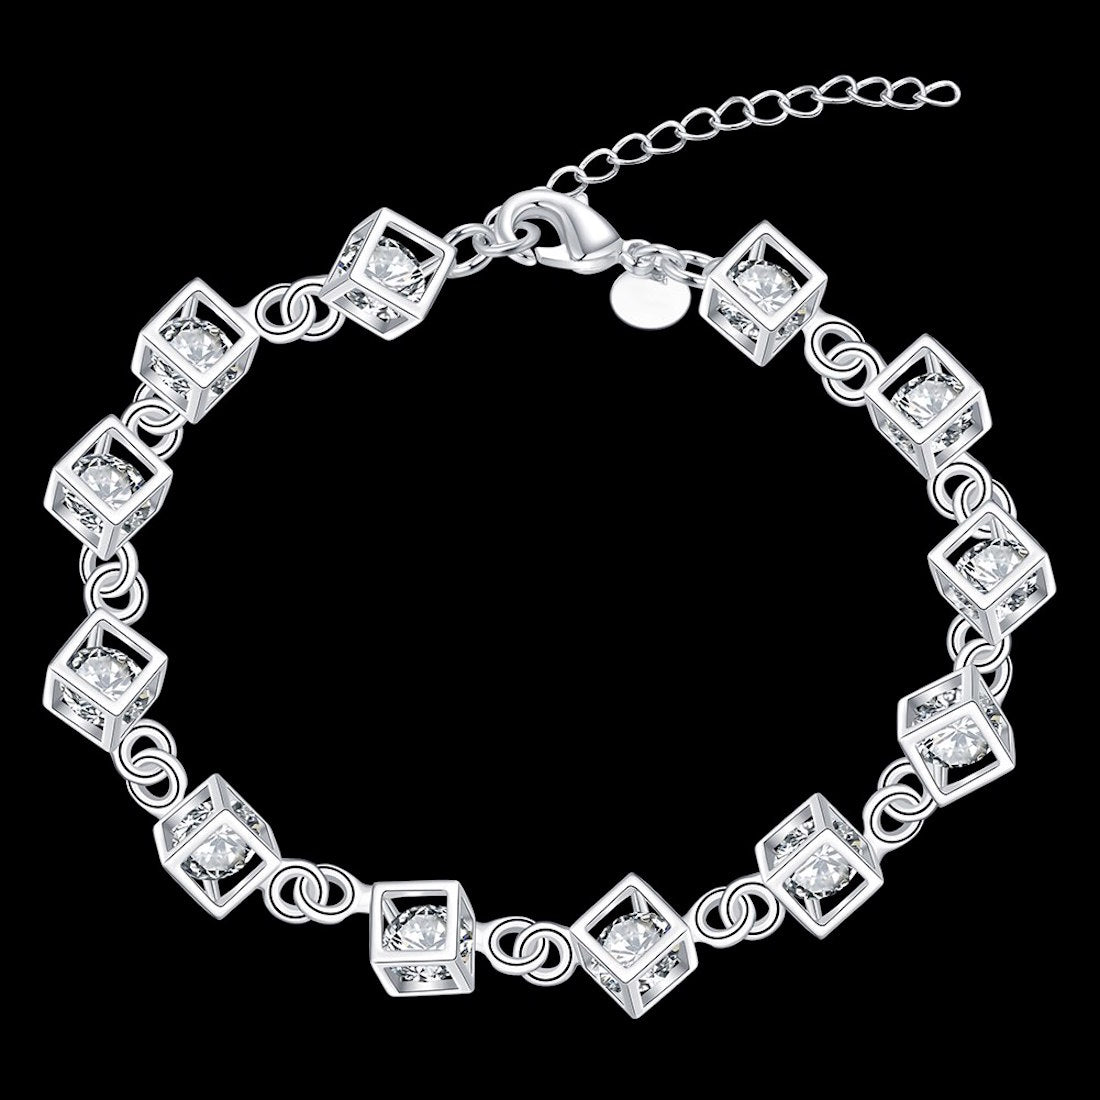 Crystal Collective Fine Silver Plated Crystal Unicorn Head Adjustable Bracelet - Silver Tone White - 1 Each